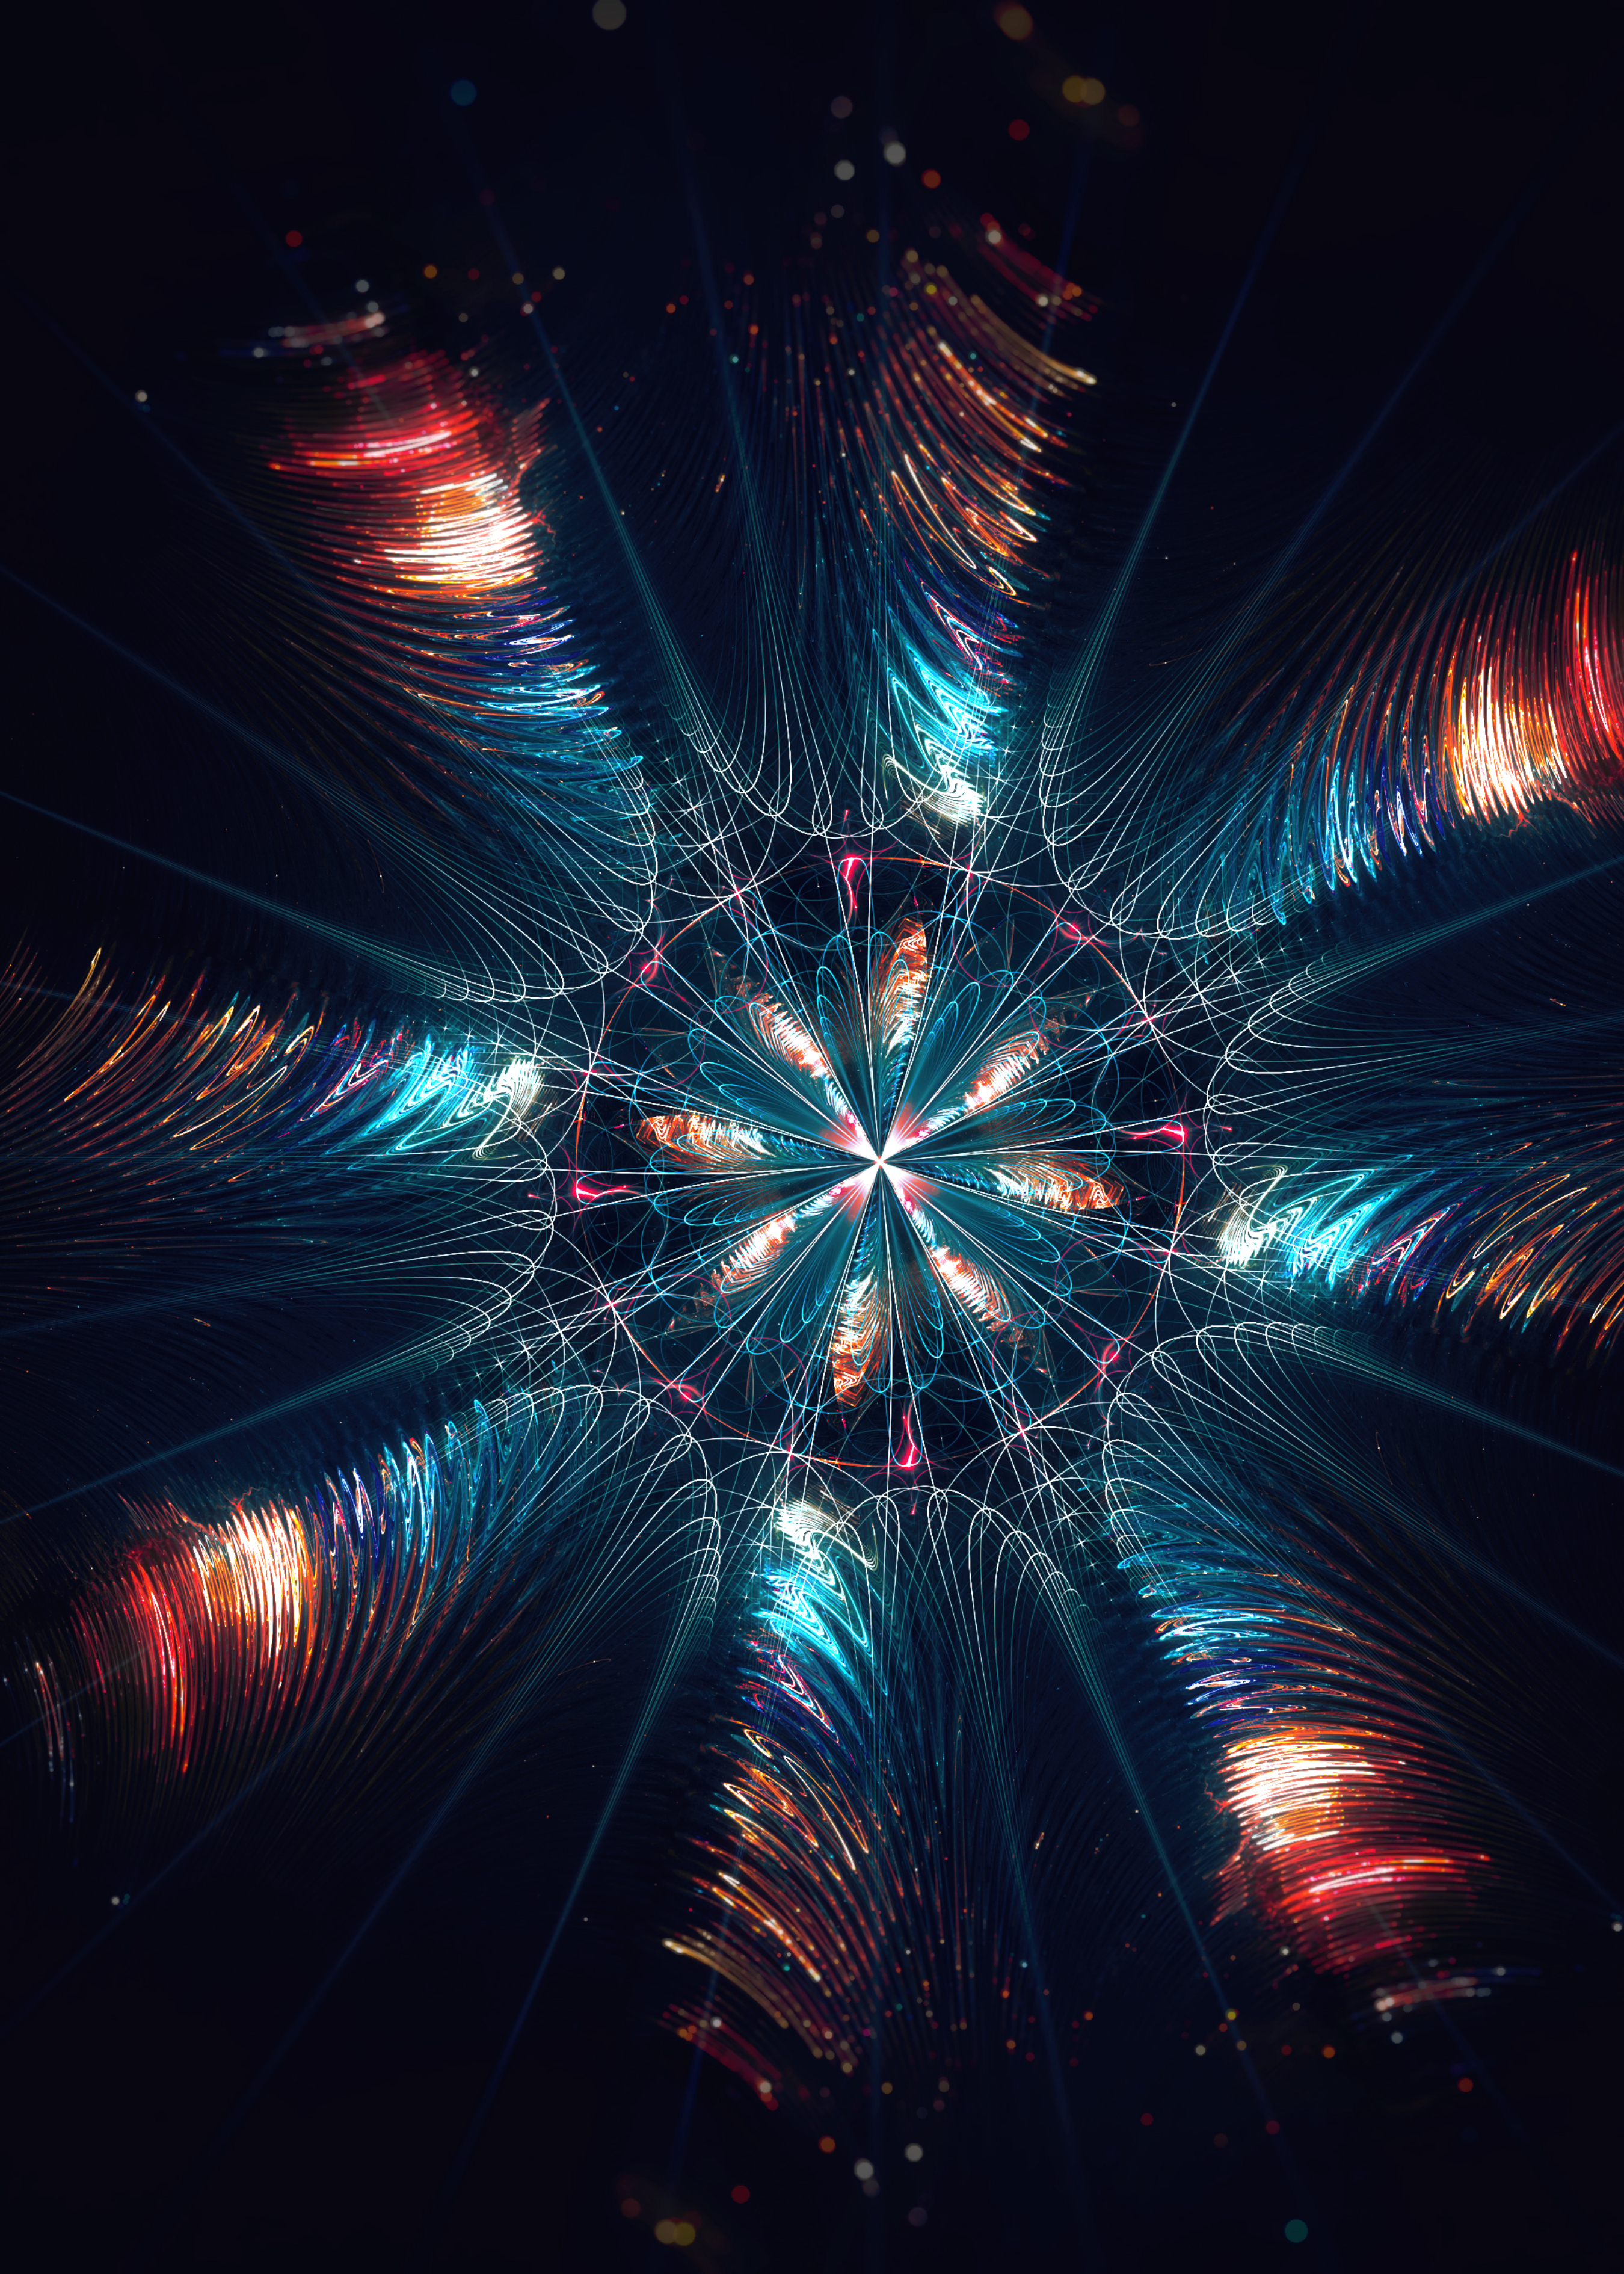 50819 download wallpaper abstract, circles, shine, brilliance, form, fractal, plexus, forms, soda, soddeniya screensavers and pictures for free